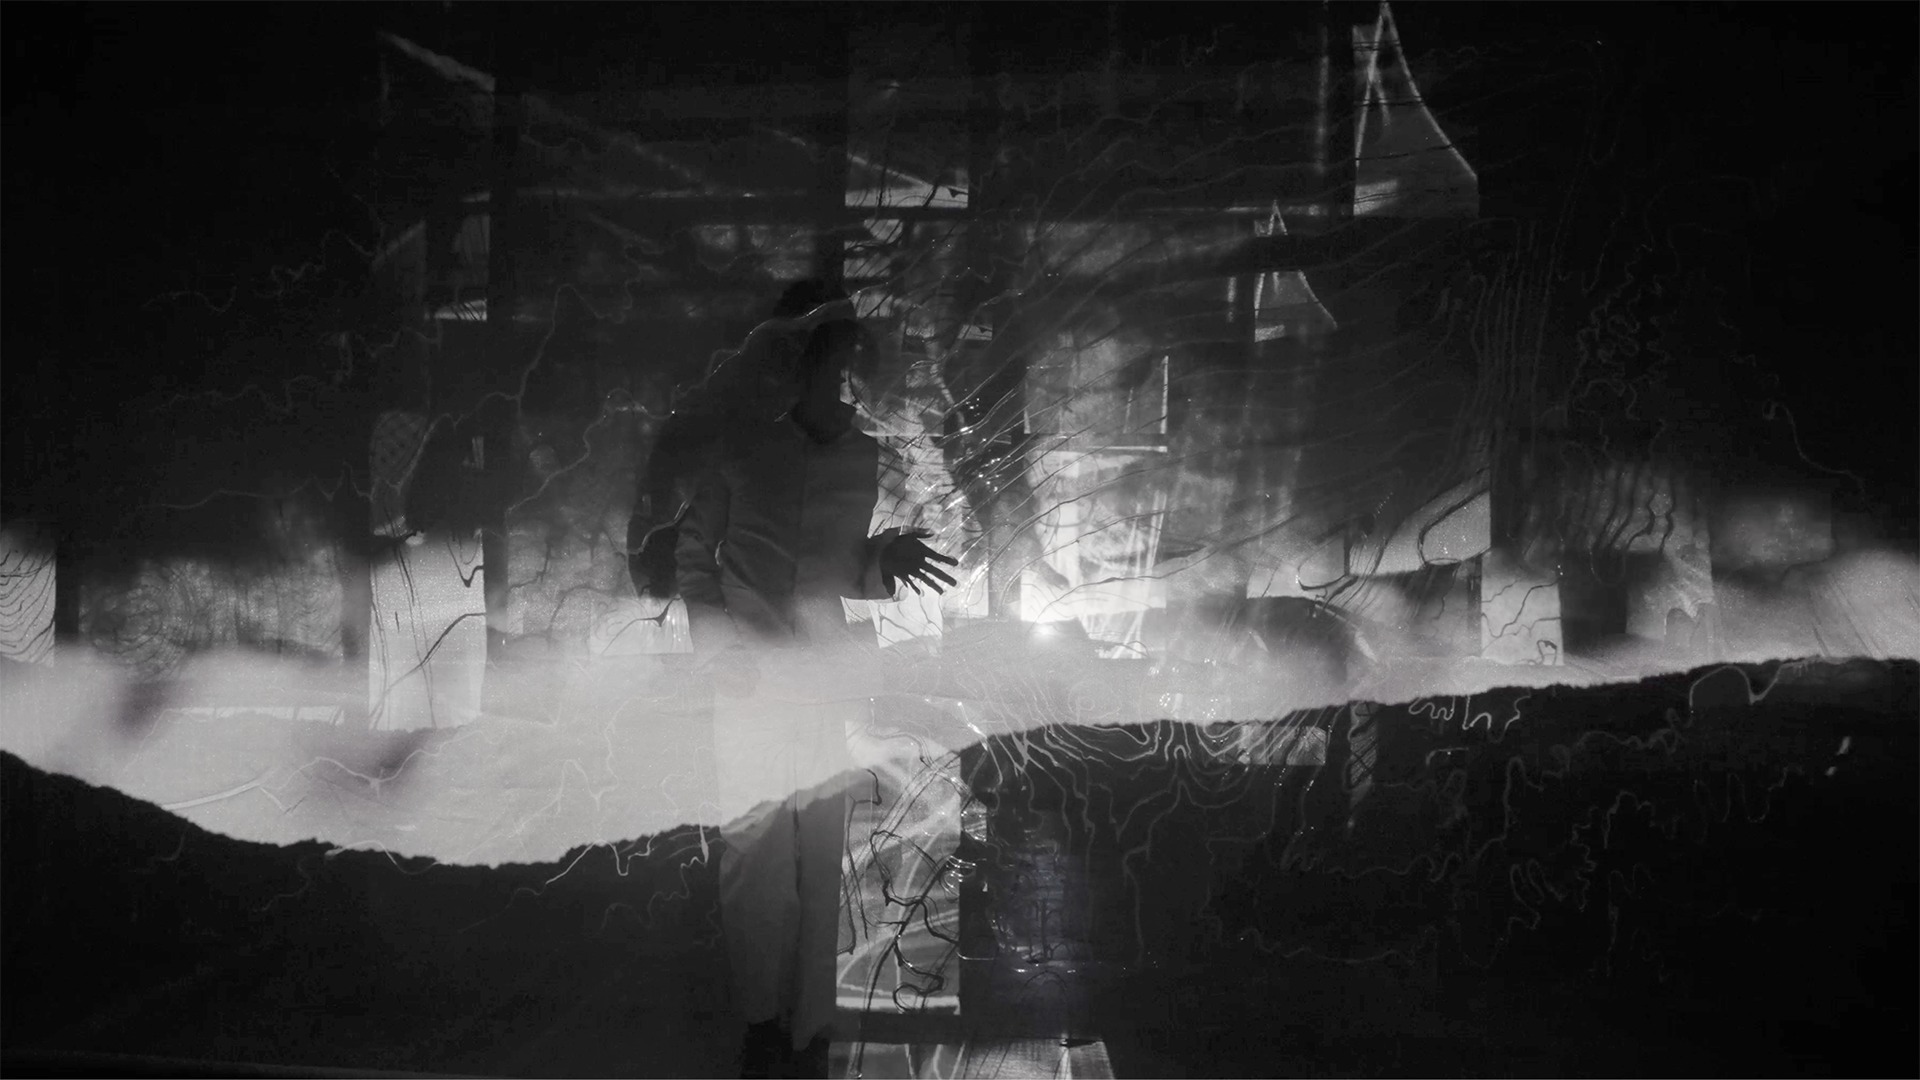 A black and white still of a silhouetted performer reaching through cloudy projected visuals